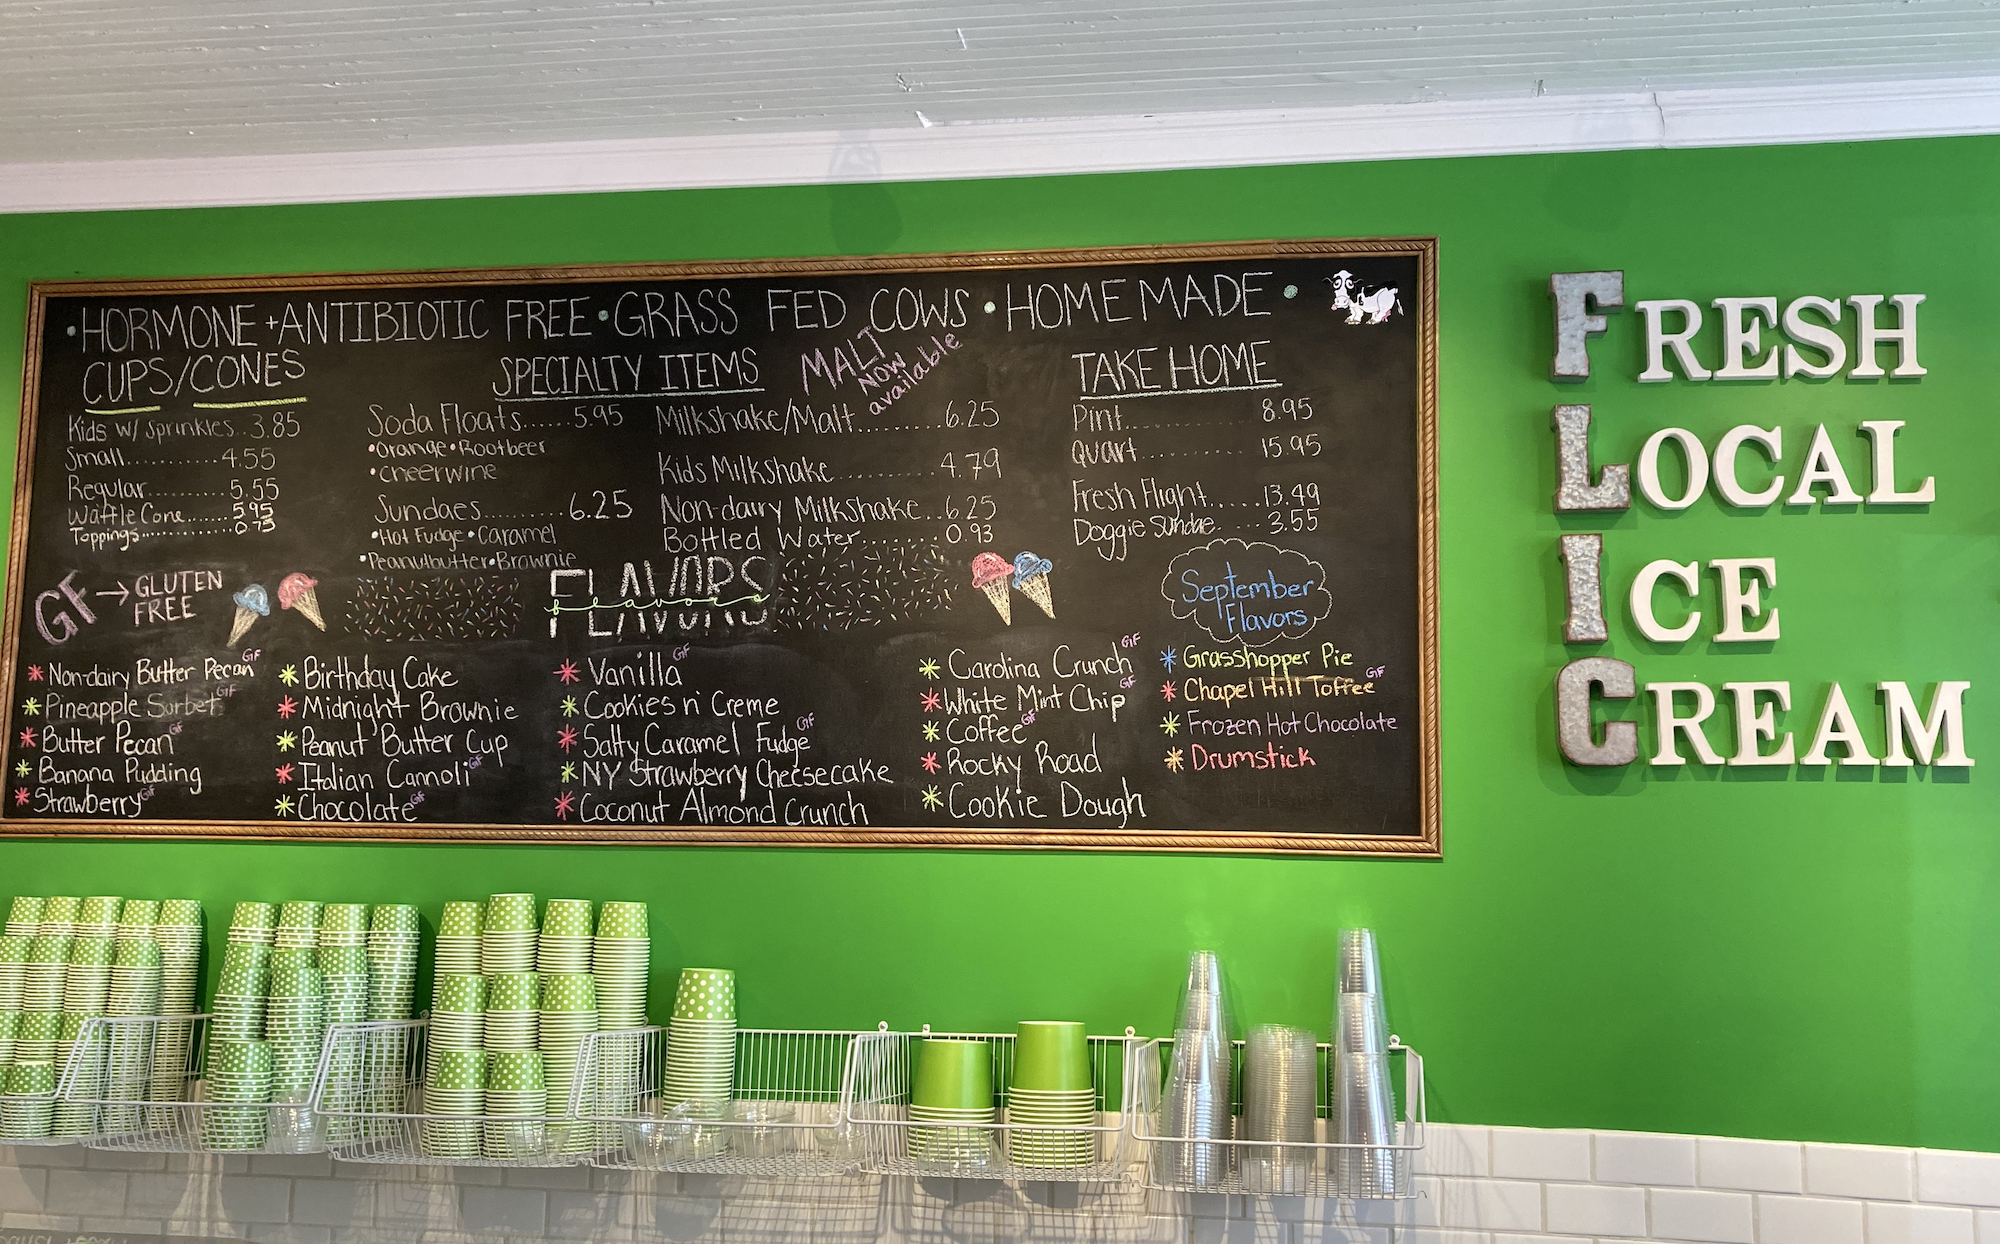 menu in the family-owned ice cream shop